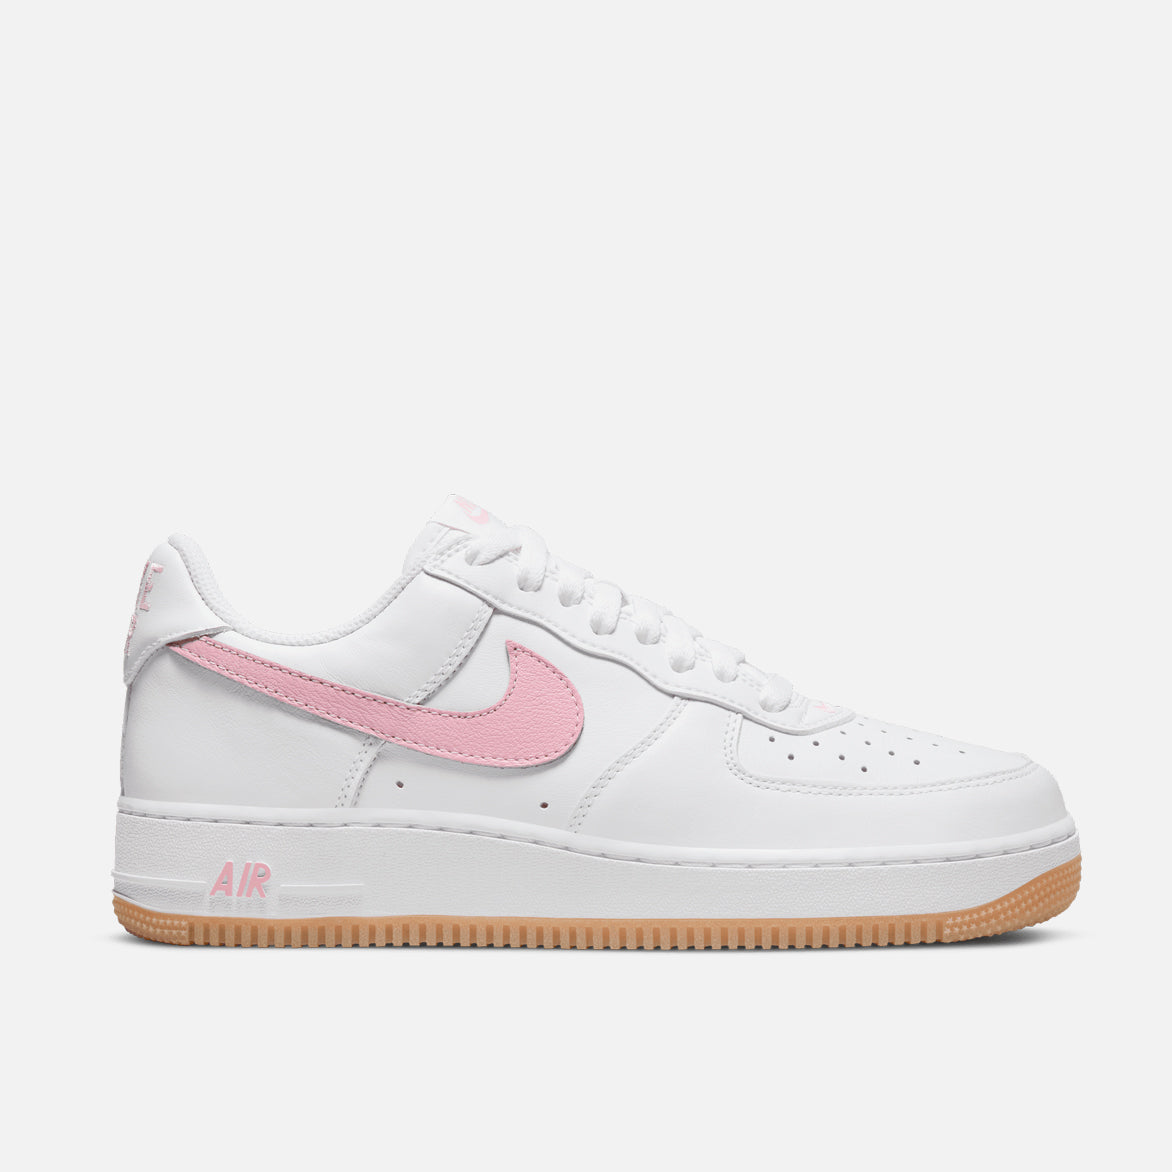 Air Force 1 Low Retro Color of the Month